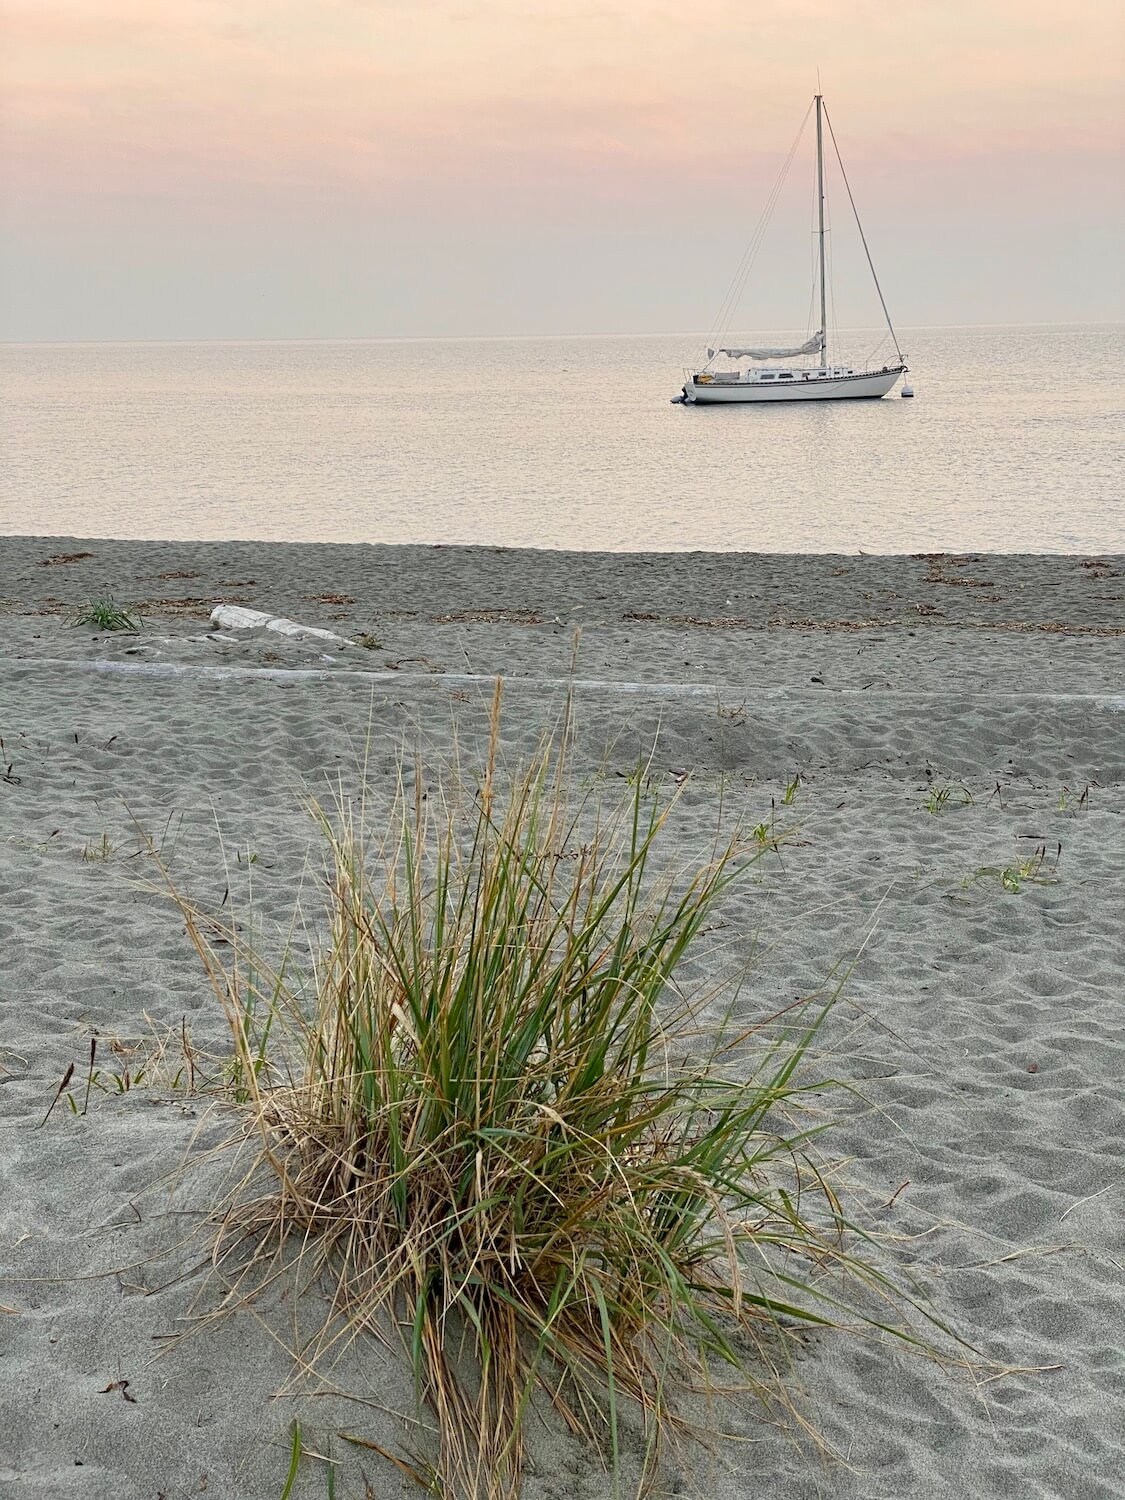 A sailboat sits quietly in the ocean while the sunset hues of Pink and purple glow on the horizon. In the foreground is a tuft of green grass on a sandy beach.